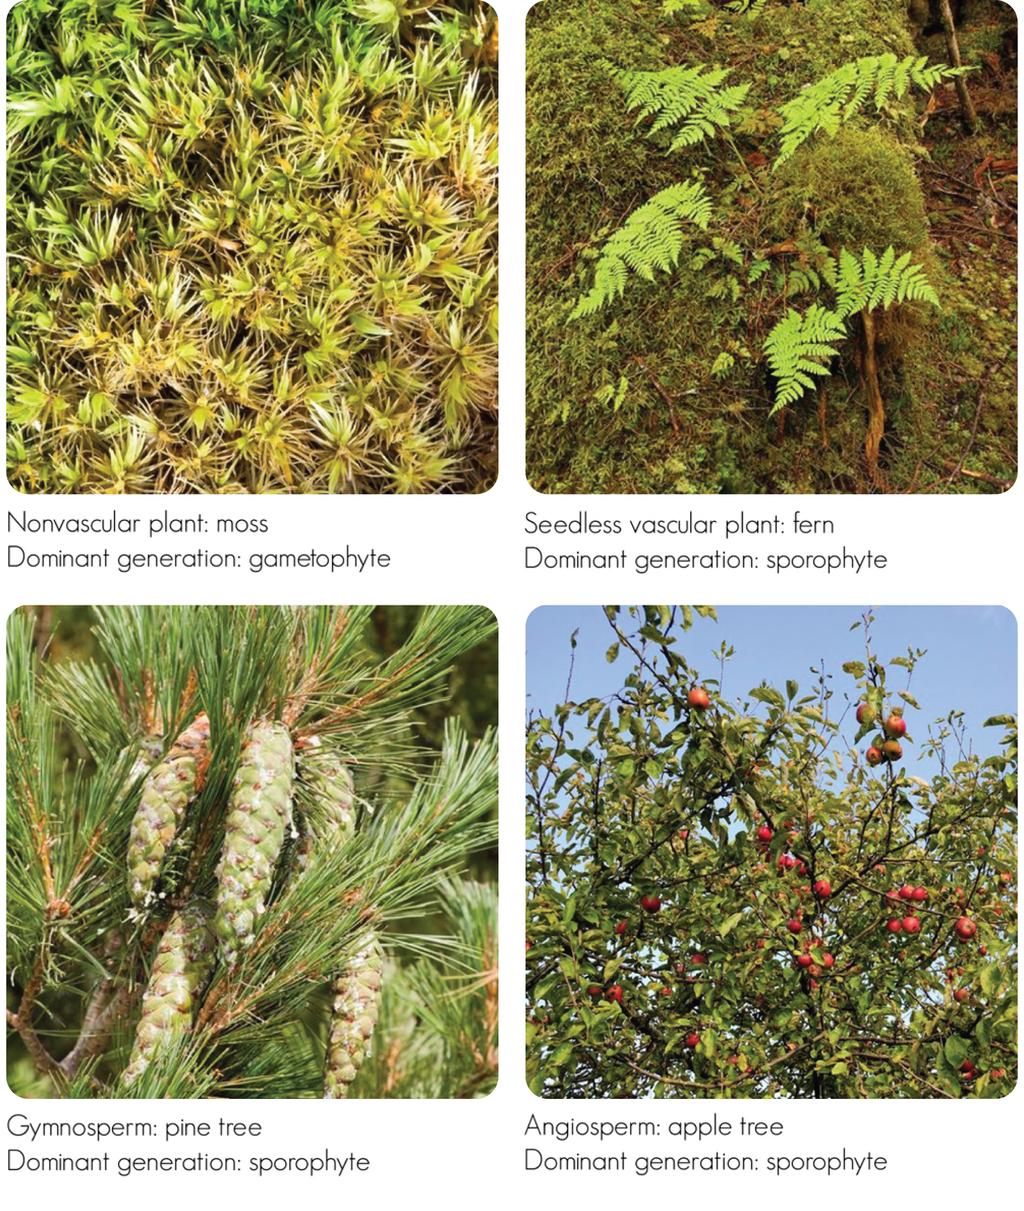 All of these photos show plants of the dominant generation in their life cycle. Life Cycle of Nonvascular Plants Nonvascular plants include mosses, liverworts, and hornworts.